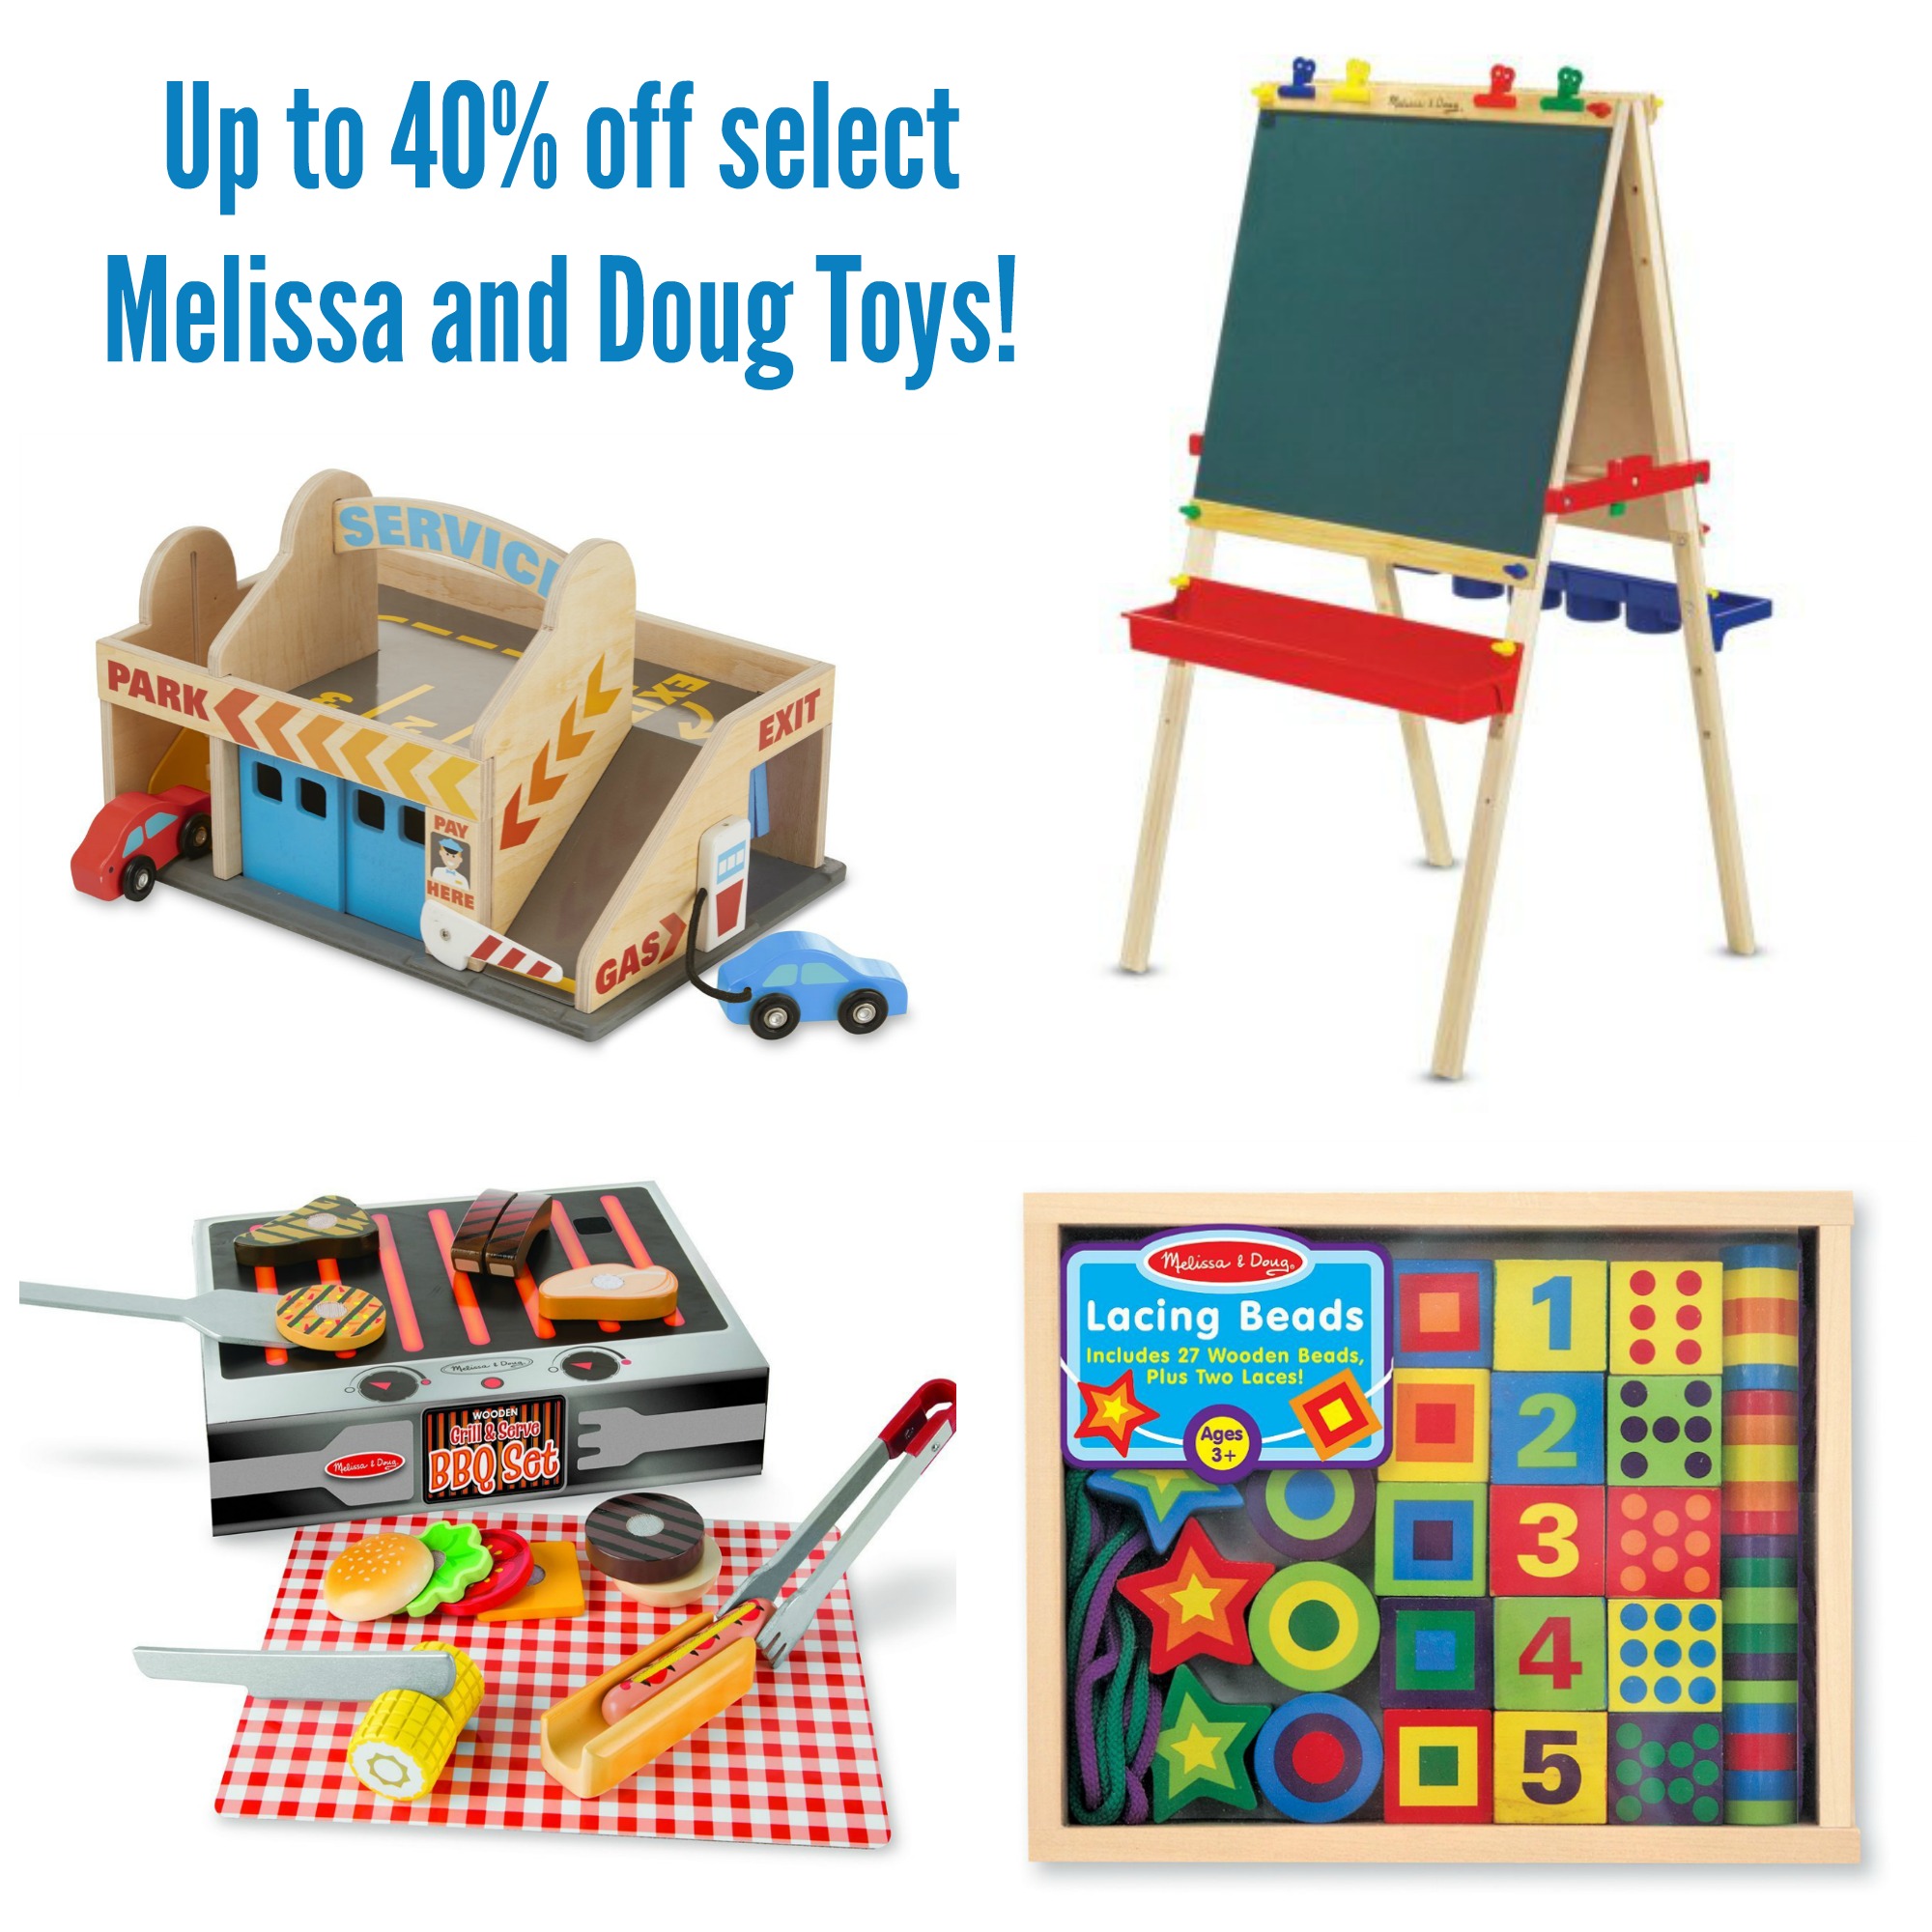 Up to 40% off Melissa and Doug Toys